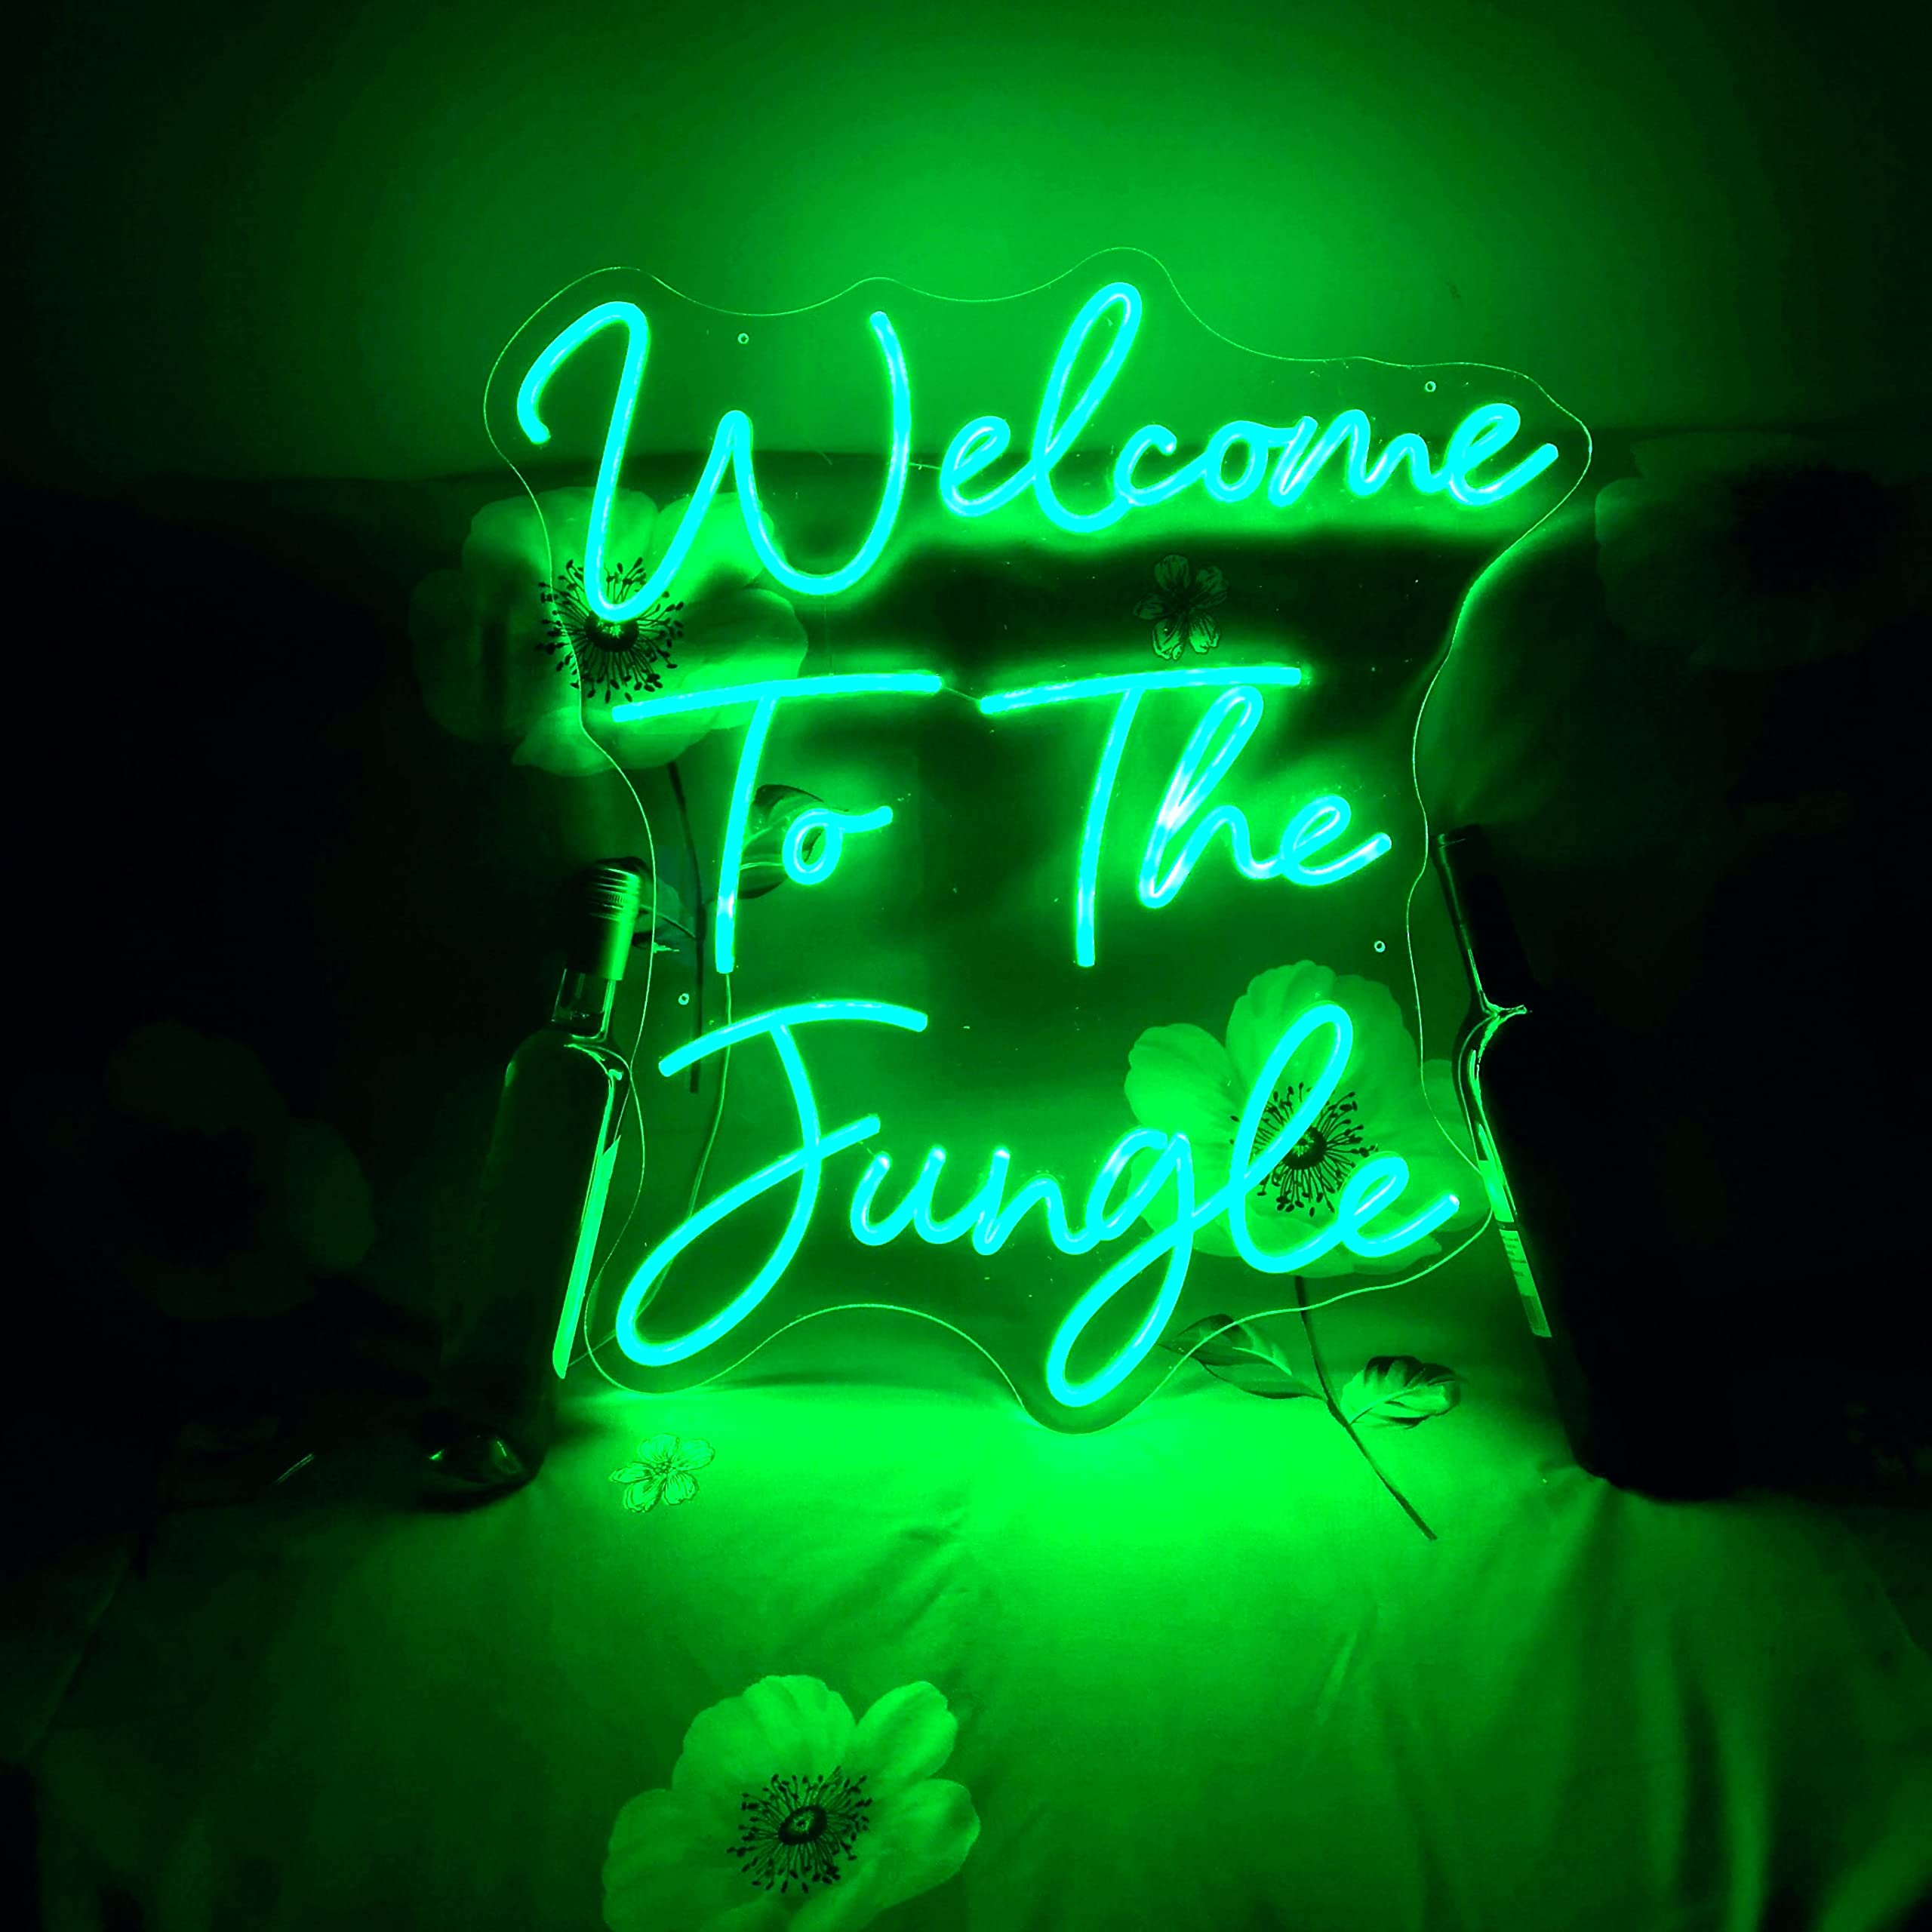 Welcome to The Jungle Neon Sign for Wall Décor, LED Neon Light for Bedroom Home Party Bar Wedding, Neon Sign Gifts for Kids,21.7X23.6 IN Green